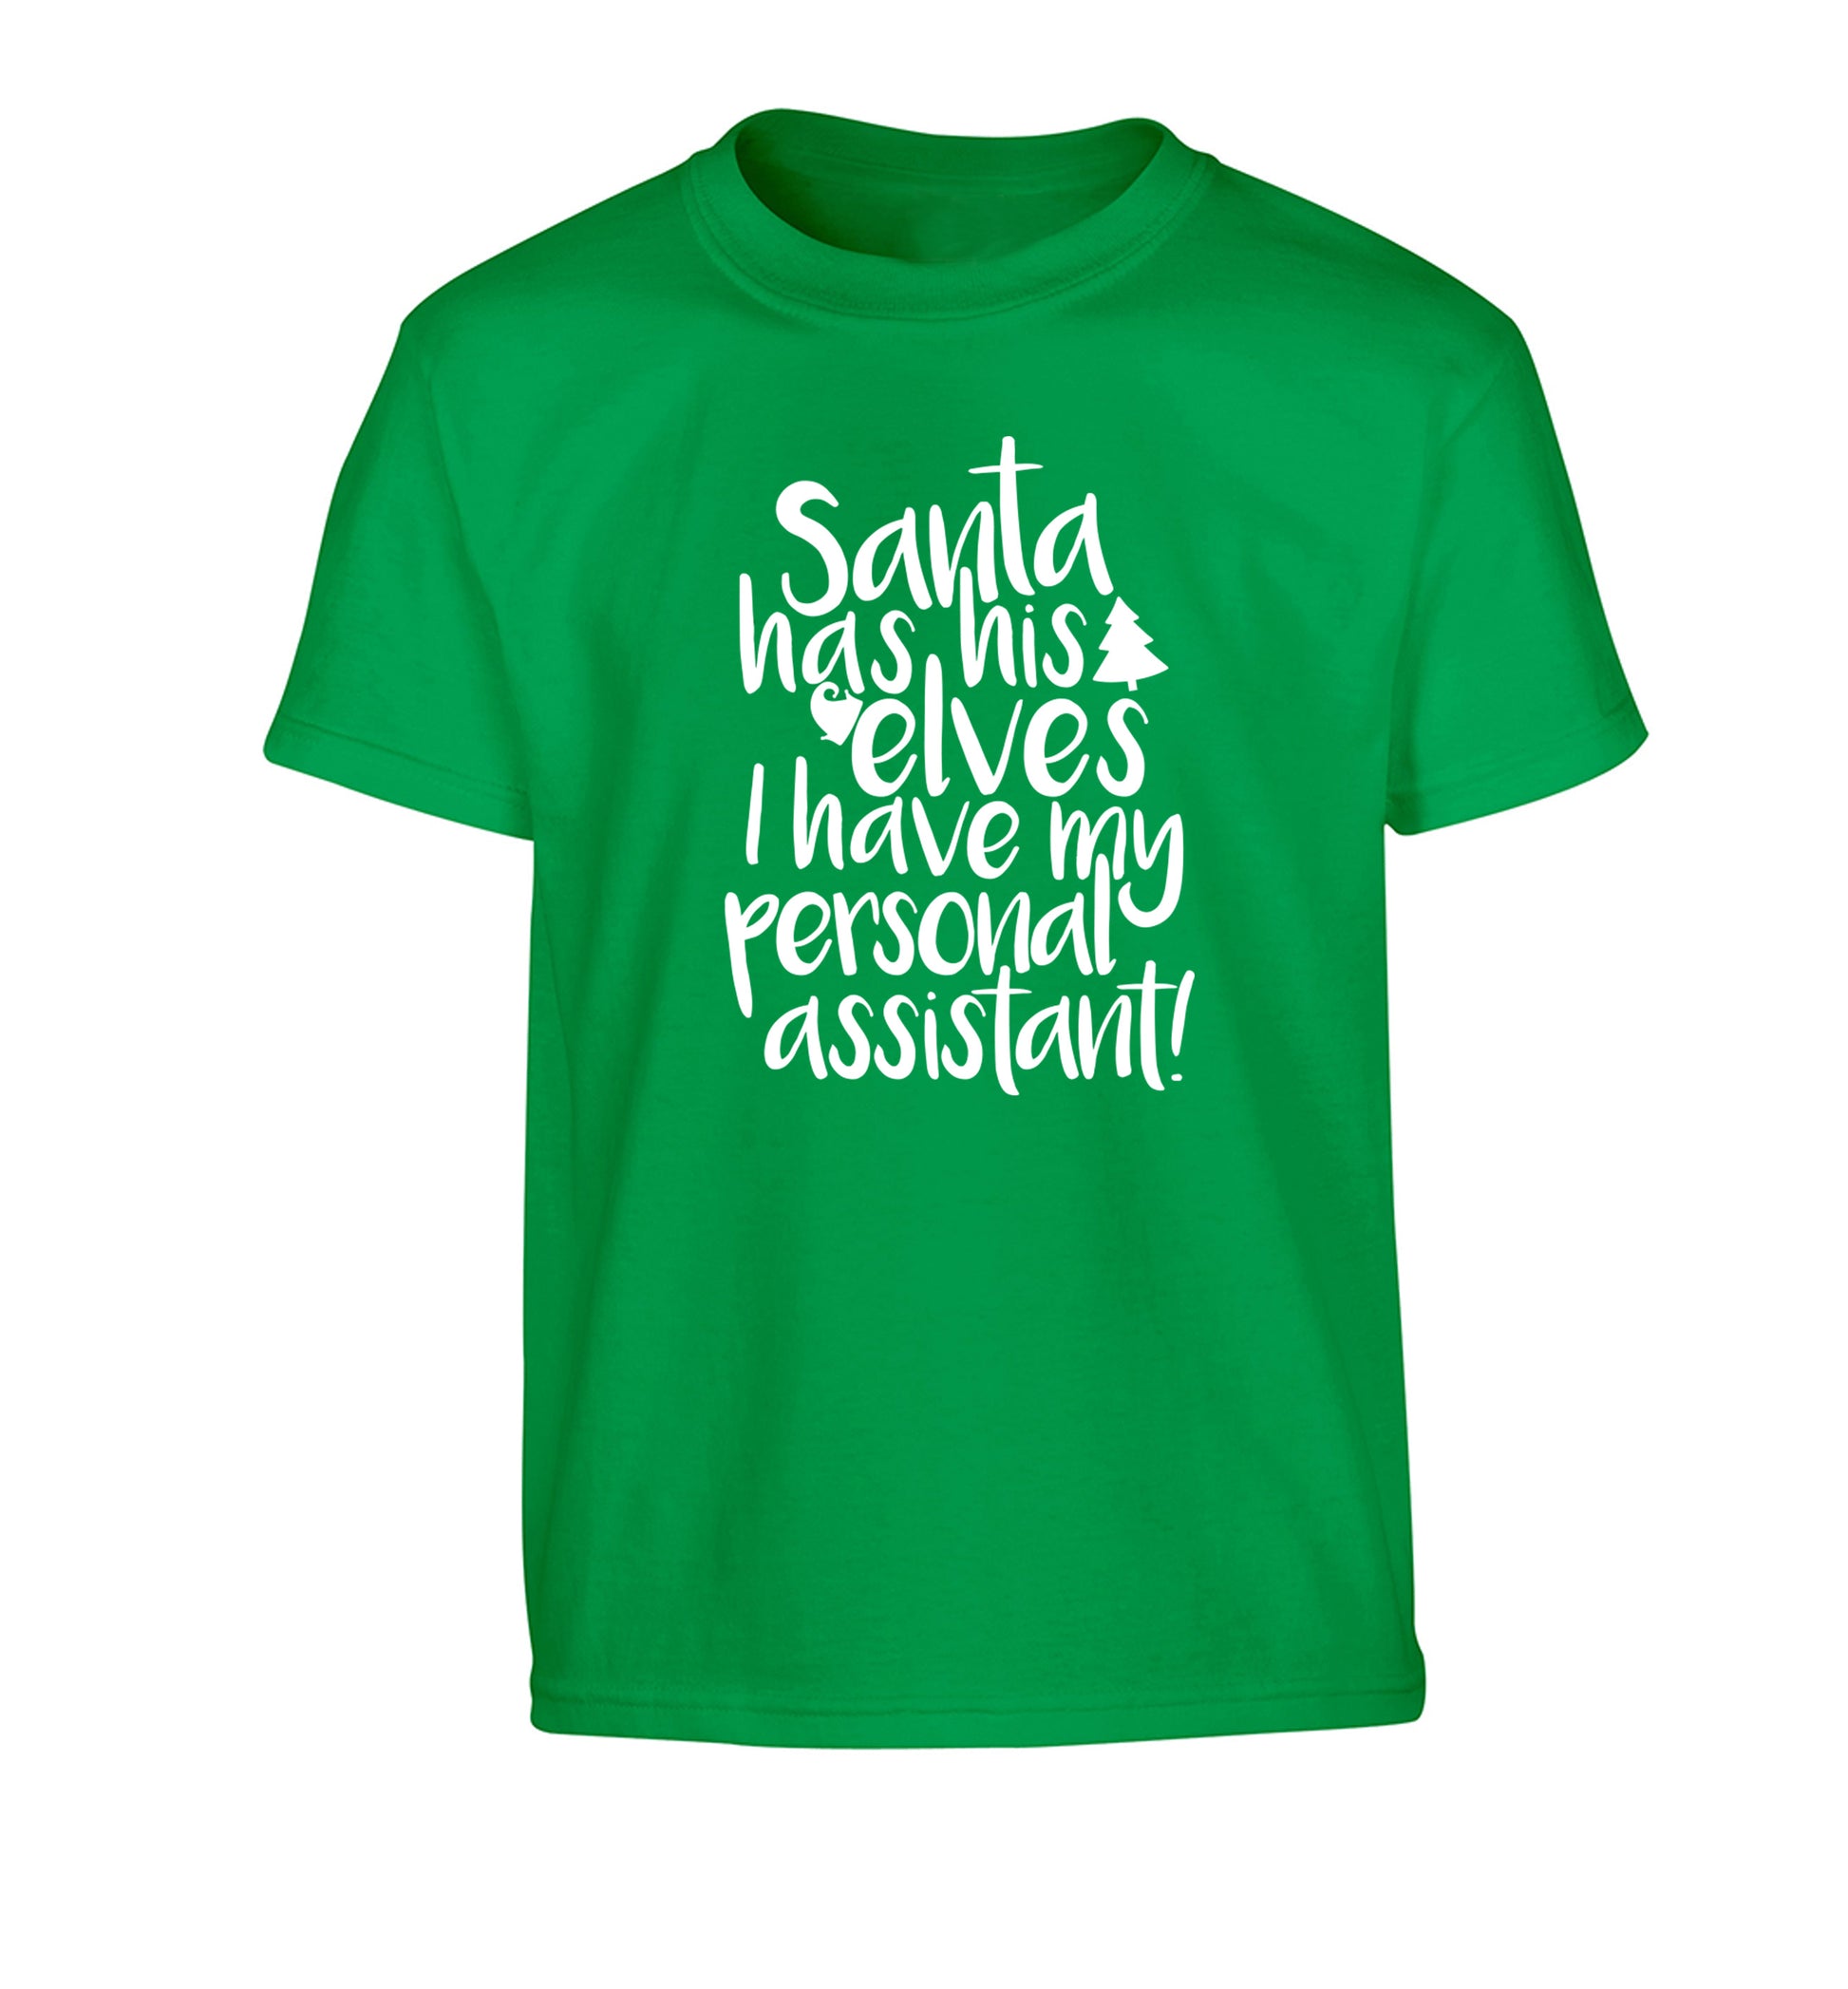 Santa has his elves I have my personal assistant Children's green Tshirt 12-14 Years